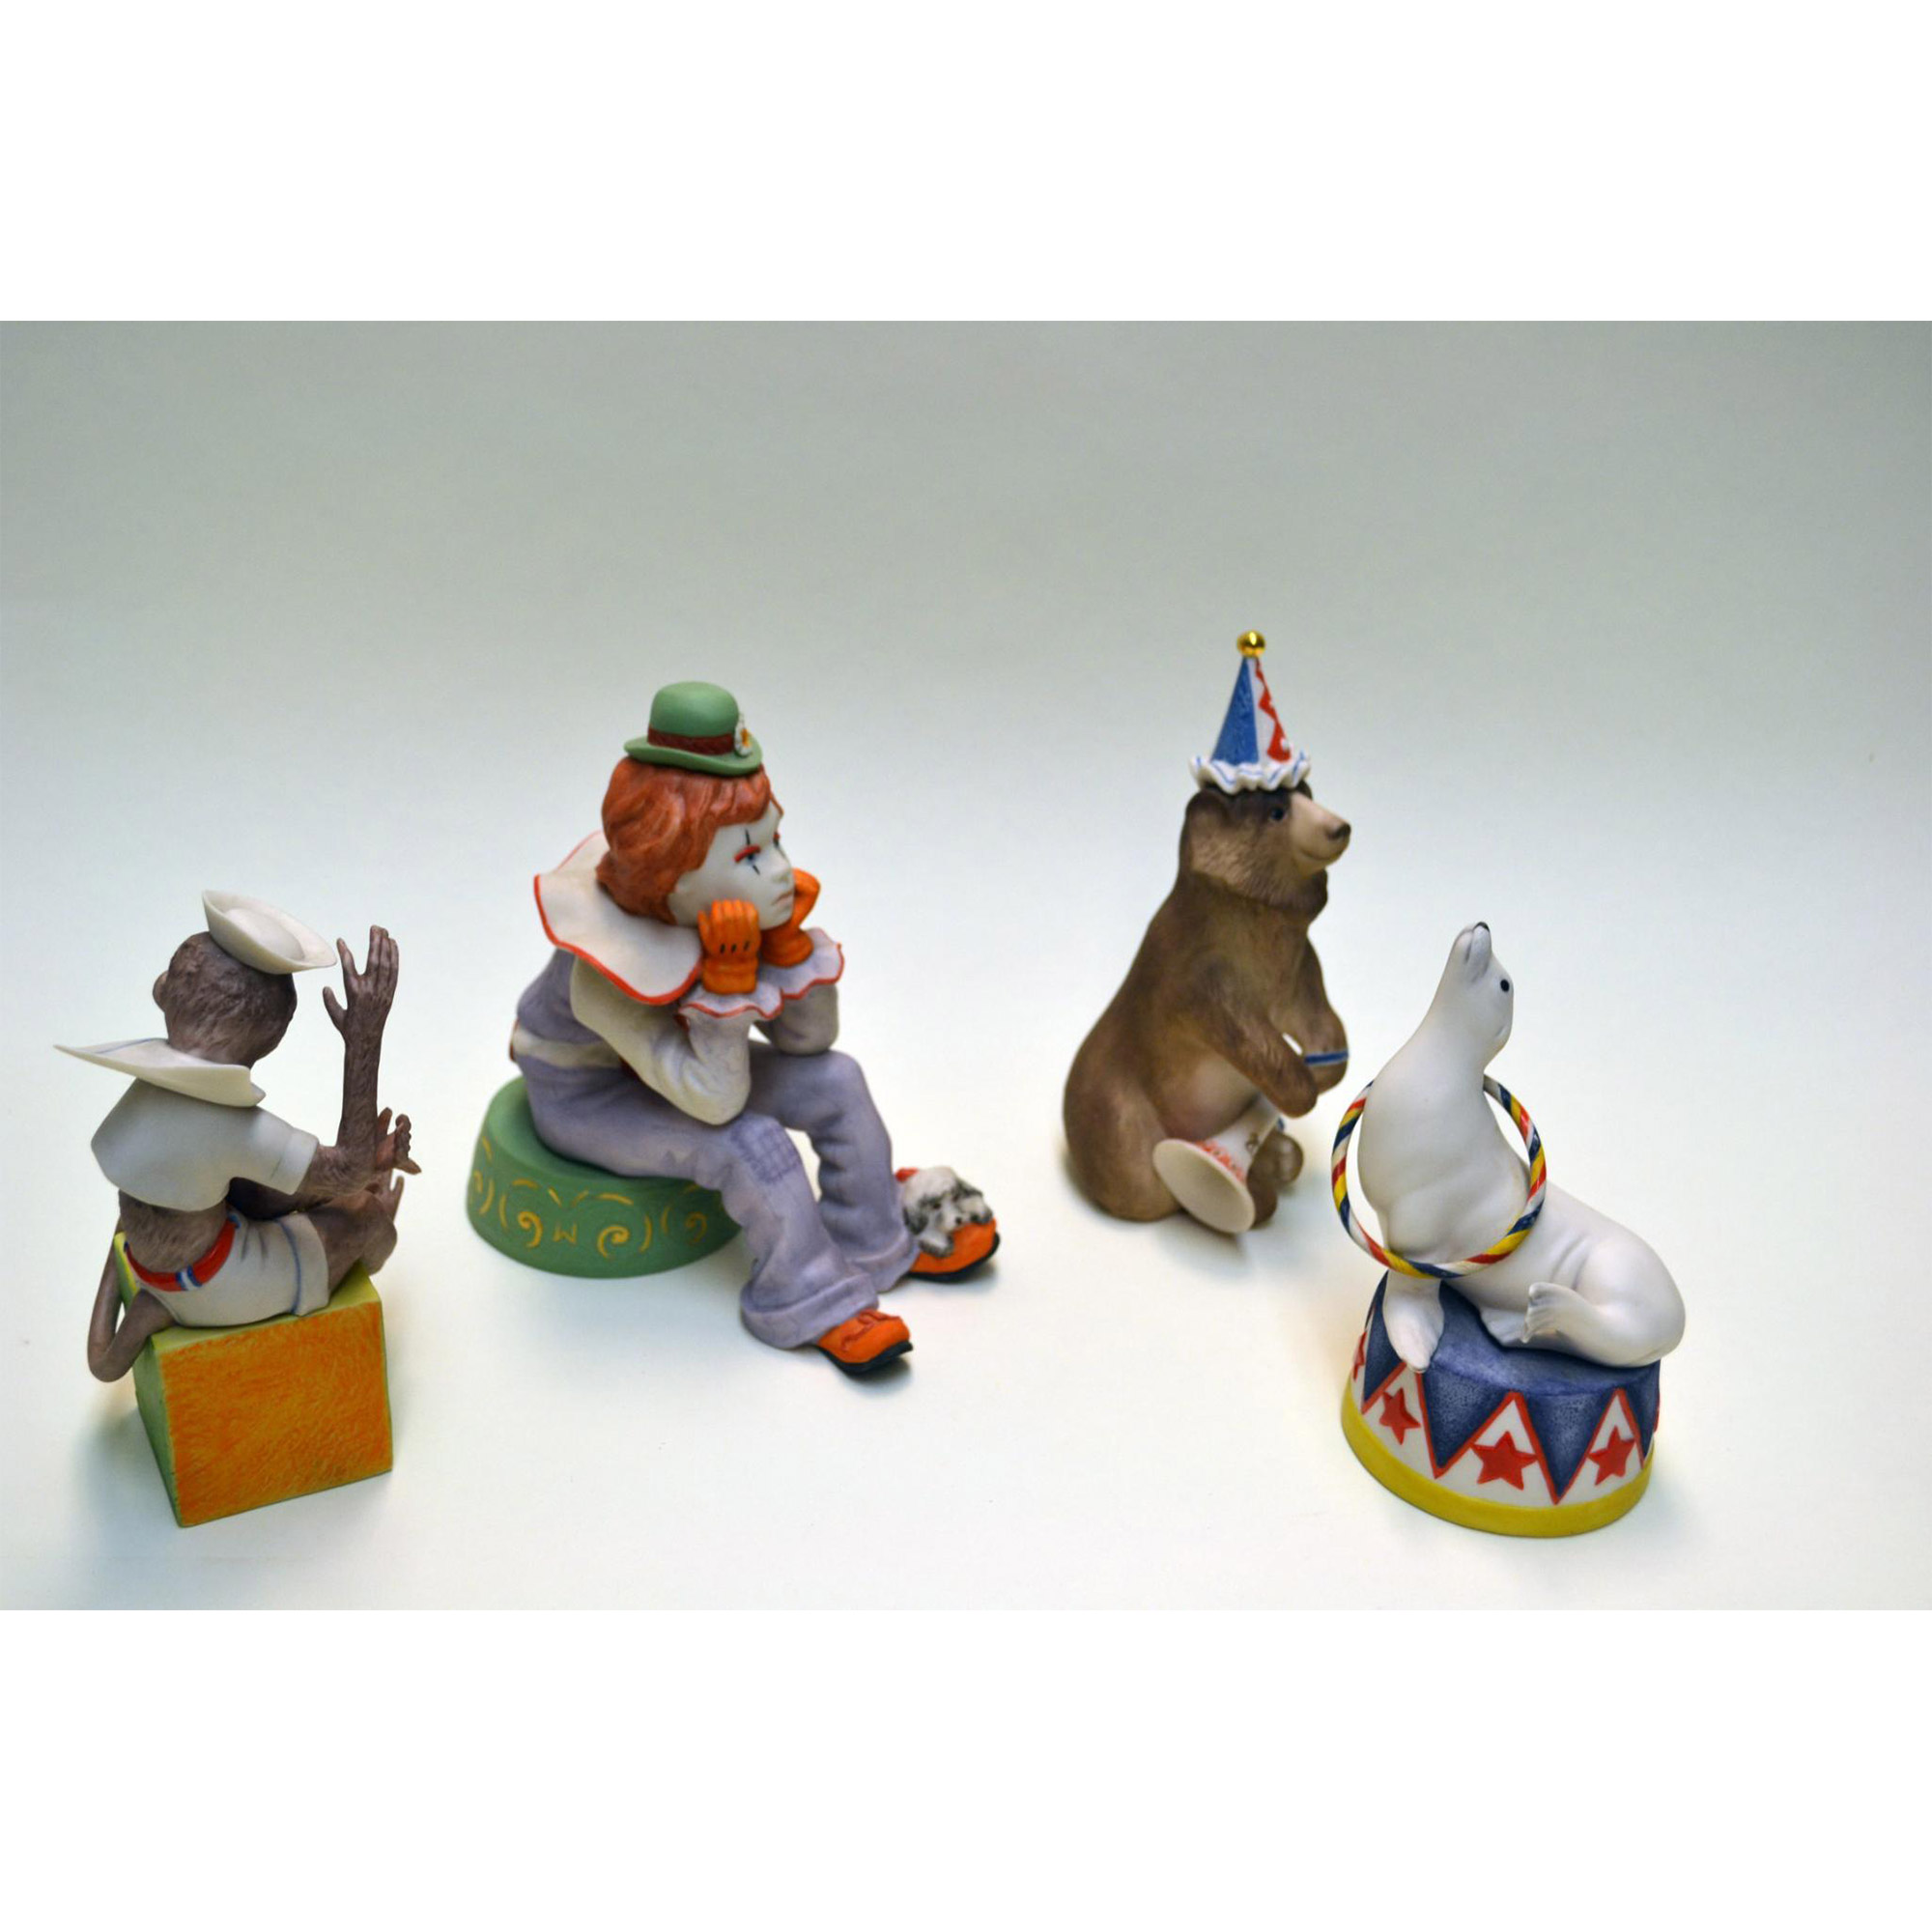 Cybis Porcelain Rumples The Pensive Clown, Barnaby The Bear, Sebastian The Seal And Bosun The Monkey - Image 2 of 5